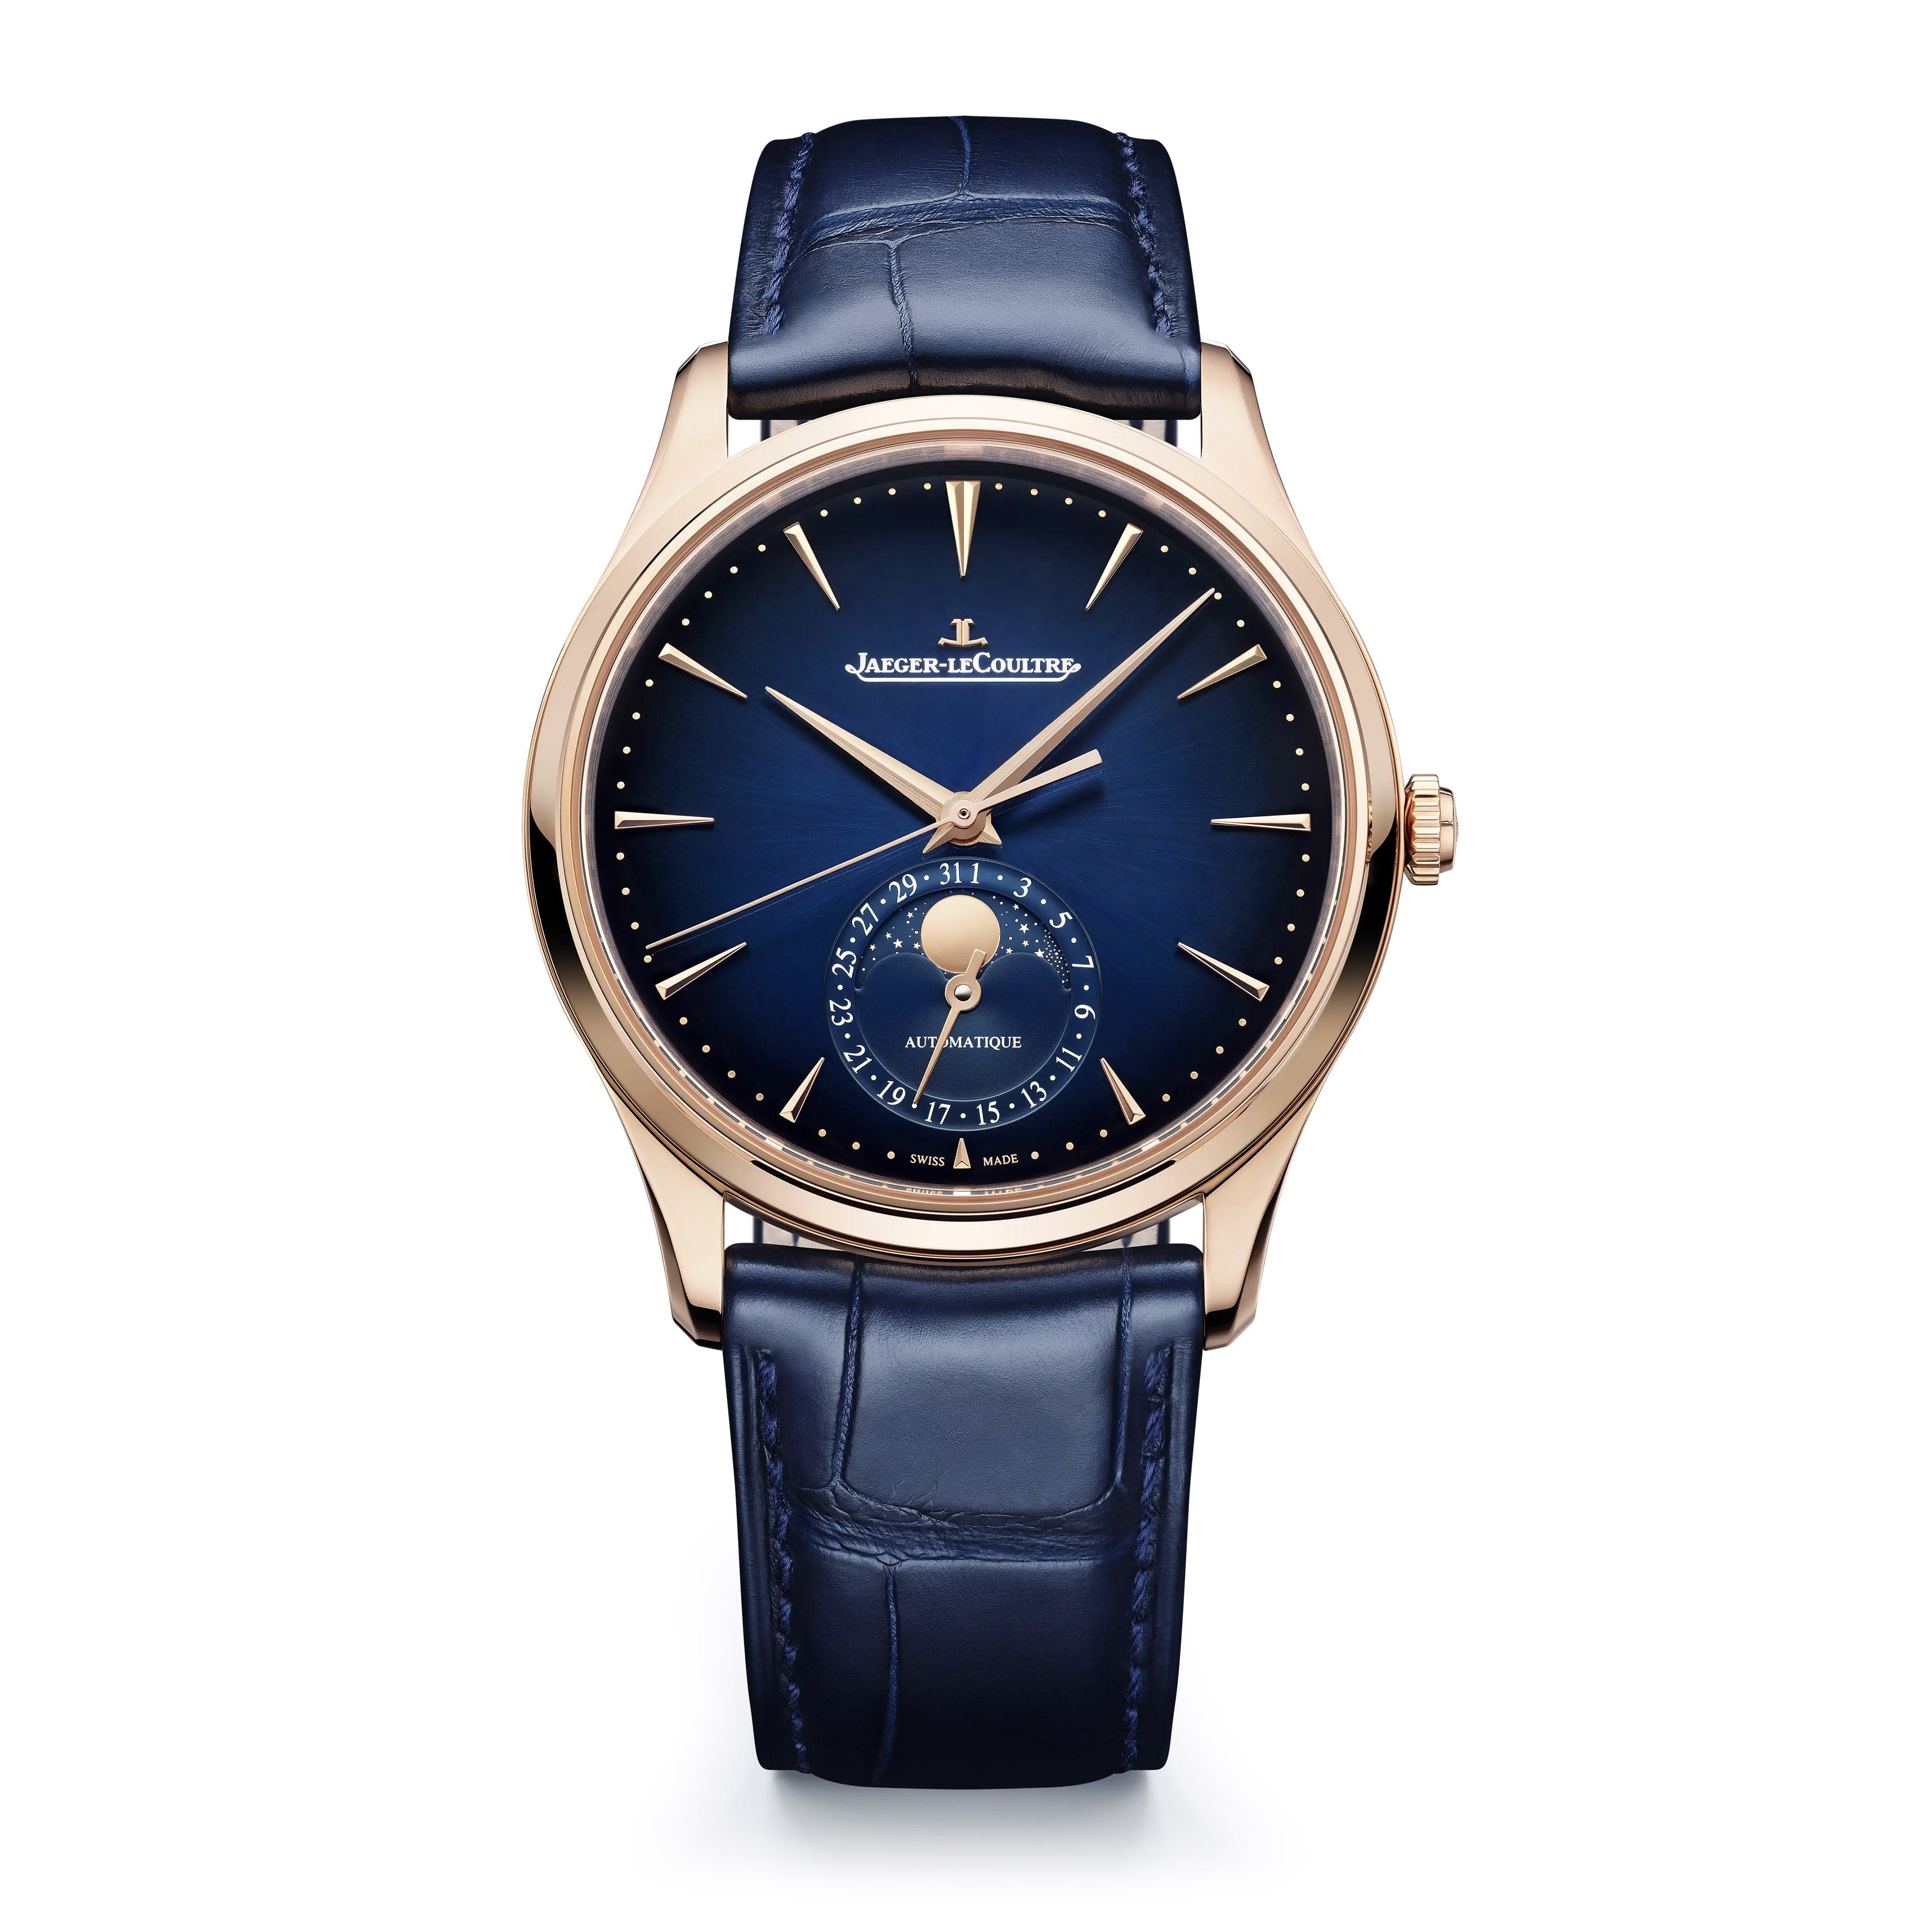 Jaeger-LeCoultre Master Ultra Thin Moon Watch, 39mm Blue Dial, Q1362580